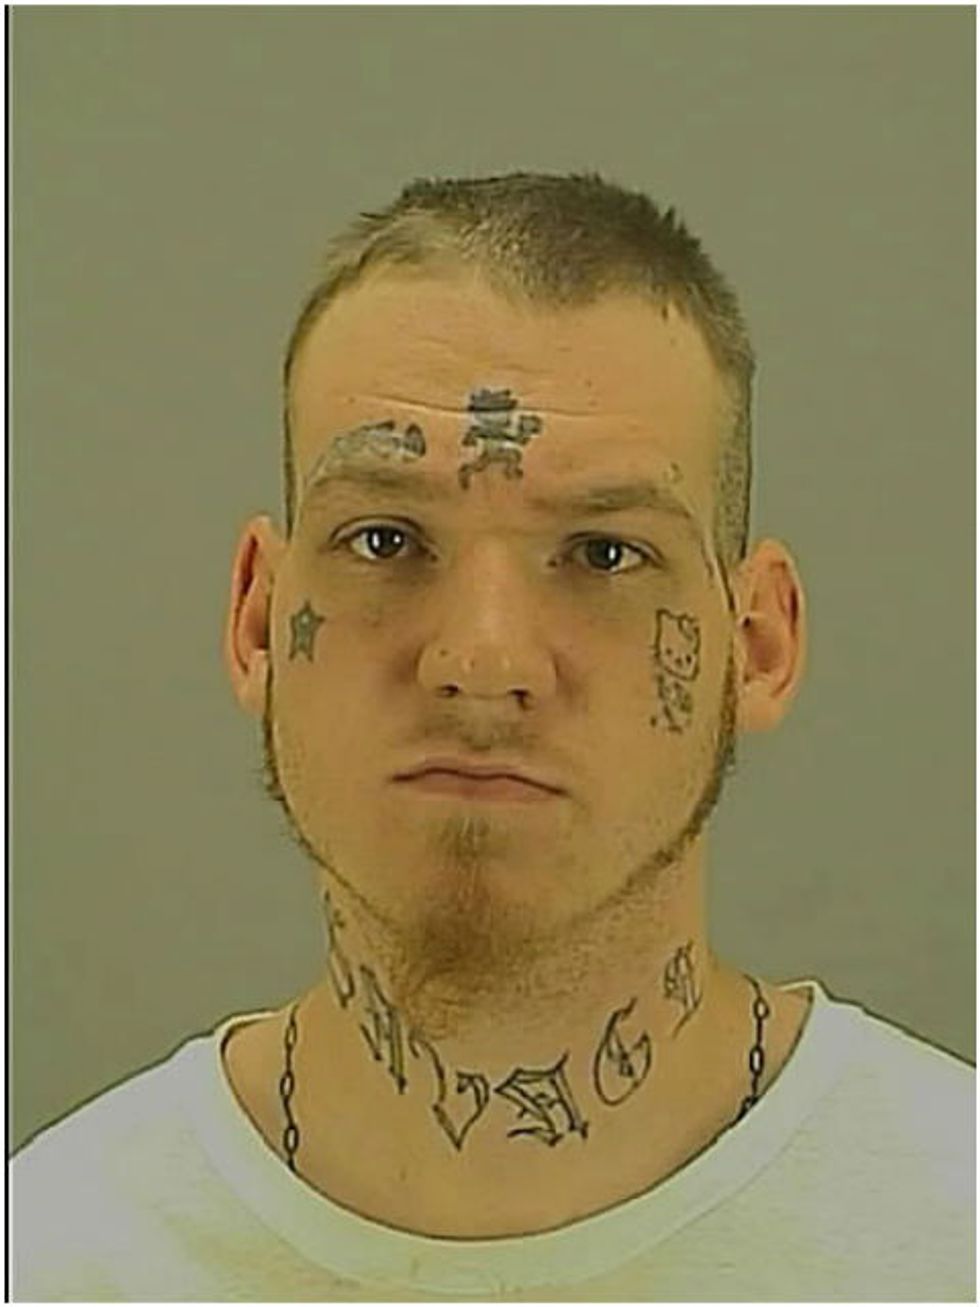 Check Out the Very Distinct Tattoos Accused Robber Has Inked on His Face